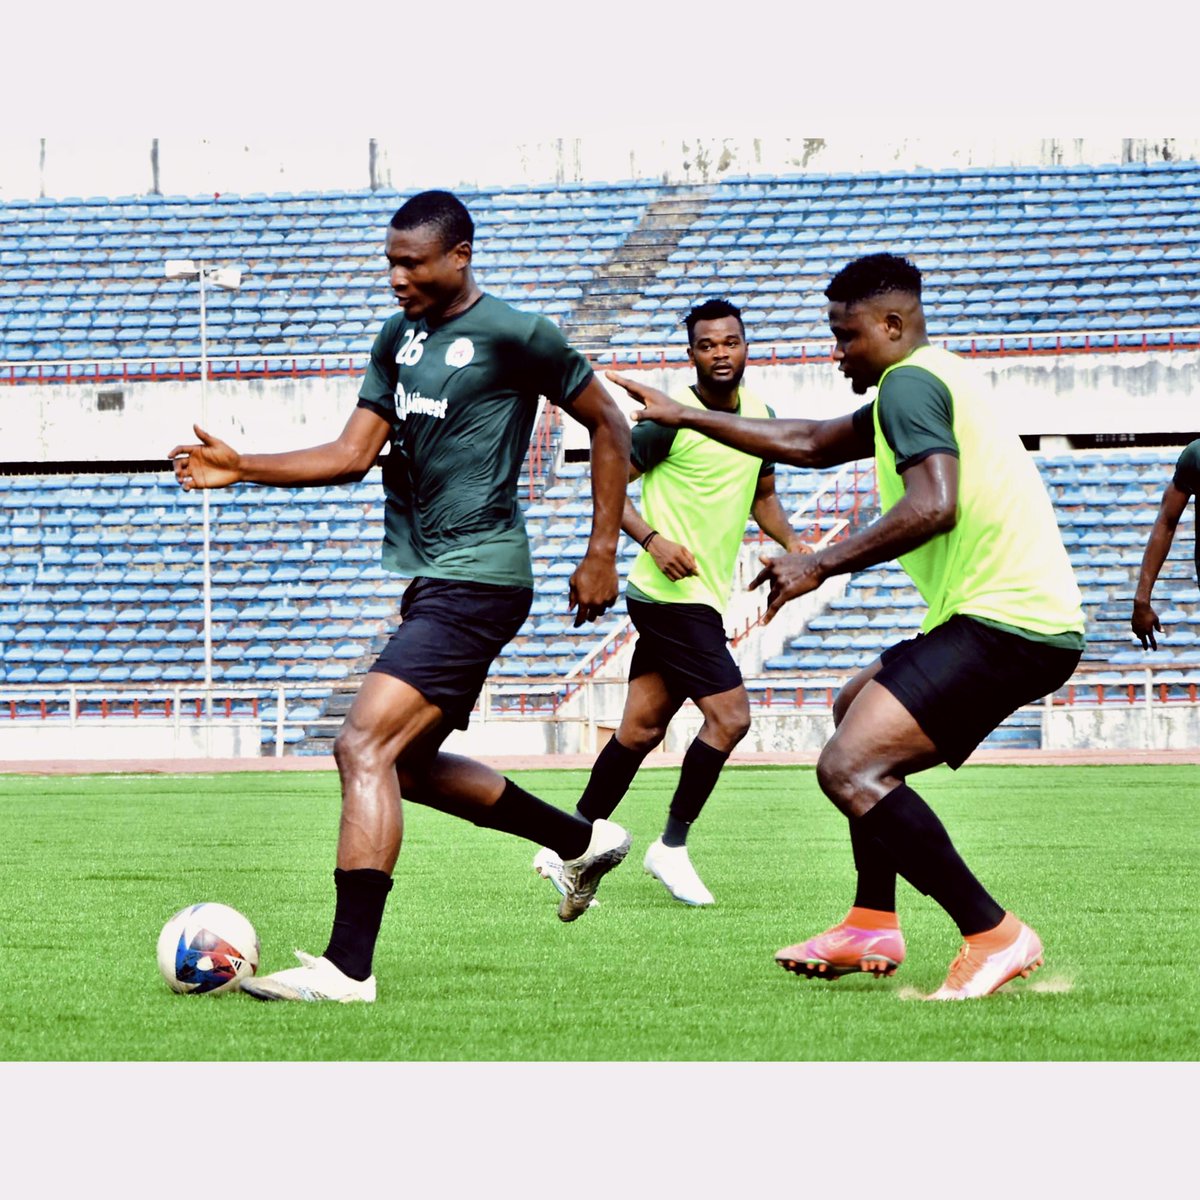 Last training session before the lads jet to Aba in Sunday's Oriental showdown.

#TrainingSession #OrientalDerby
#HistoryTogether #NeverSayDie